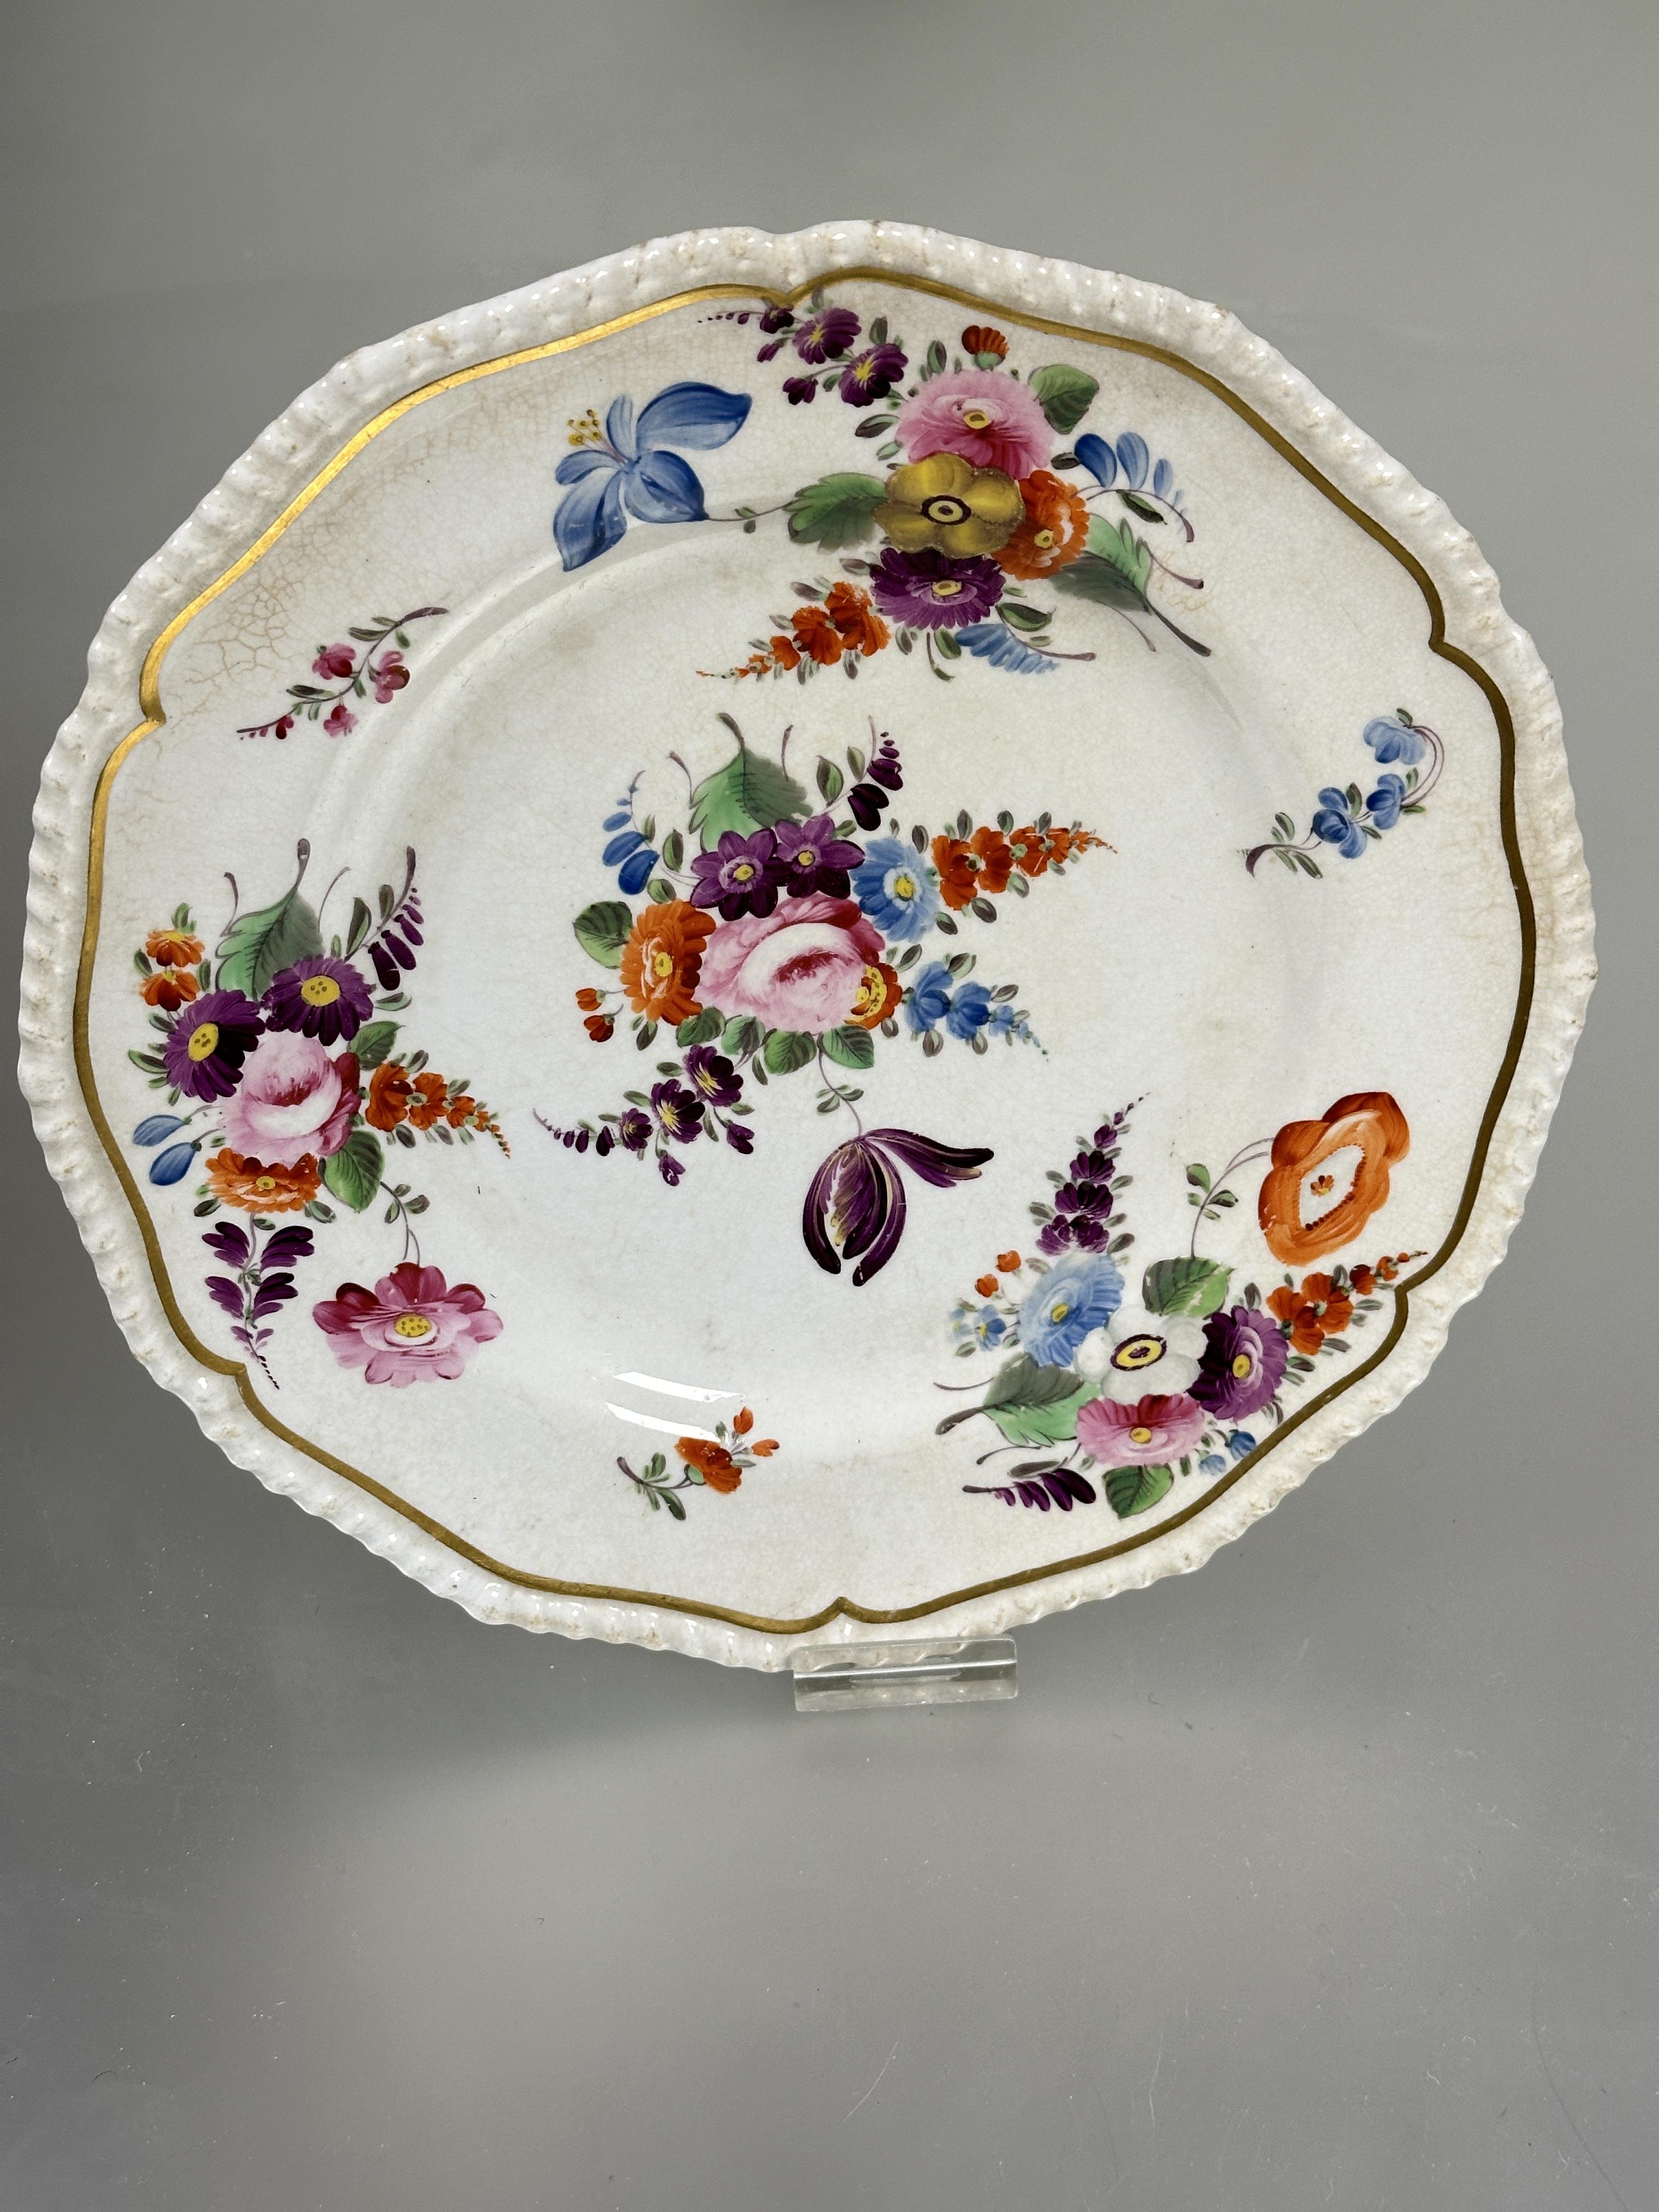 A 19thc Derby plate of scalloped design with beaded border decorated with hand painted floral sprays - Image 2 of 3